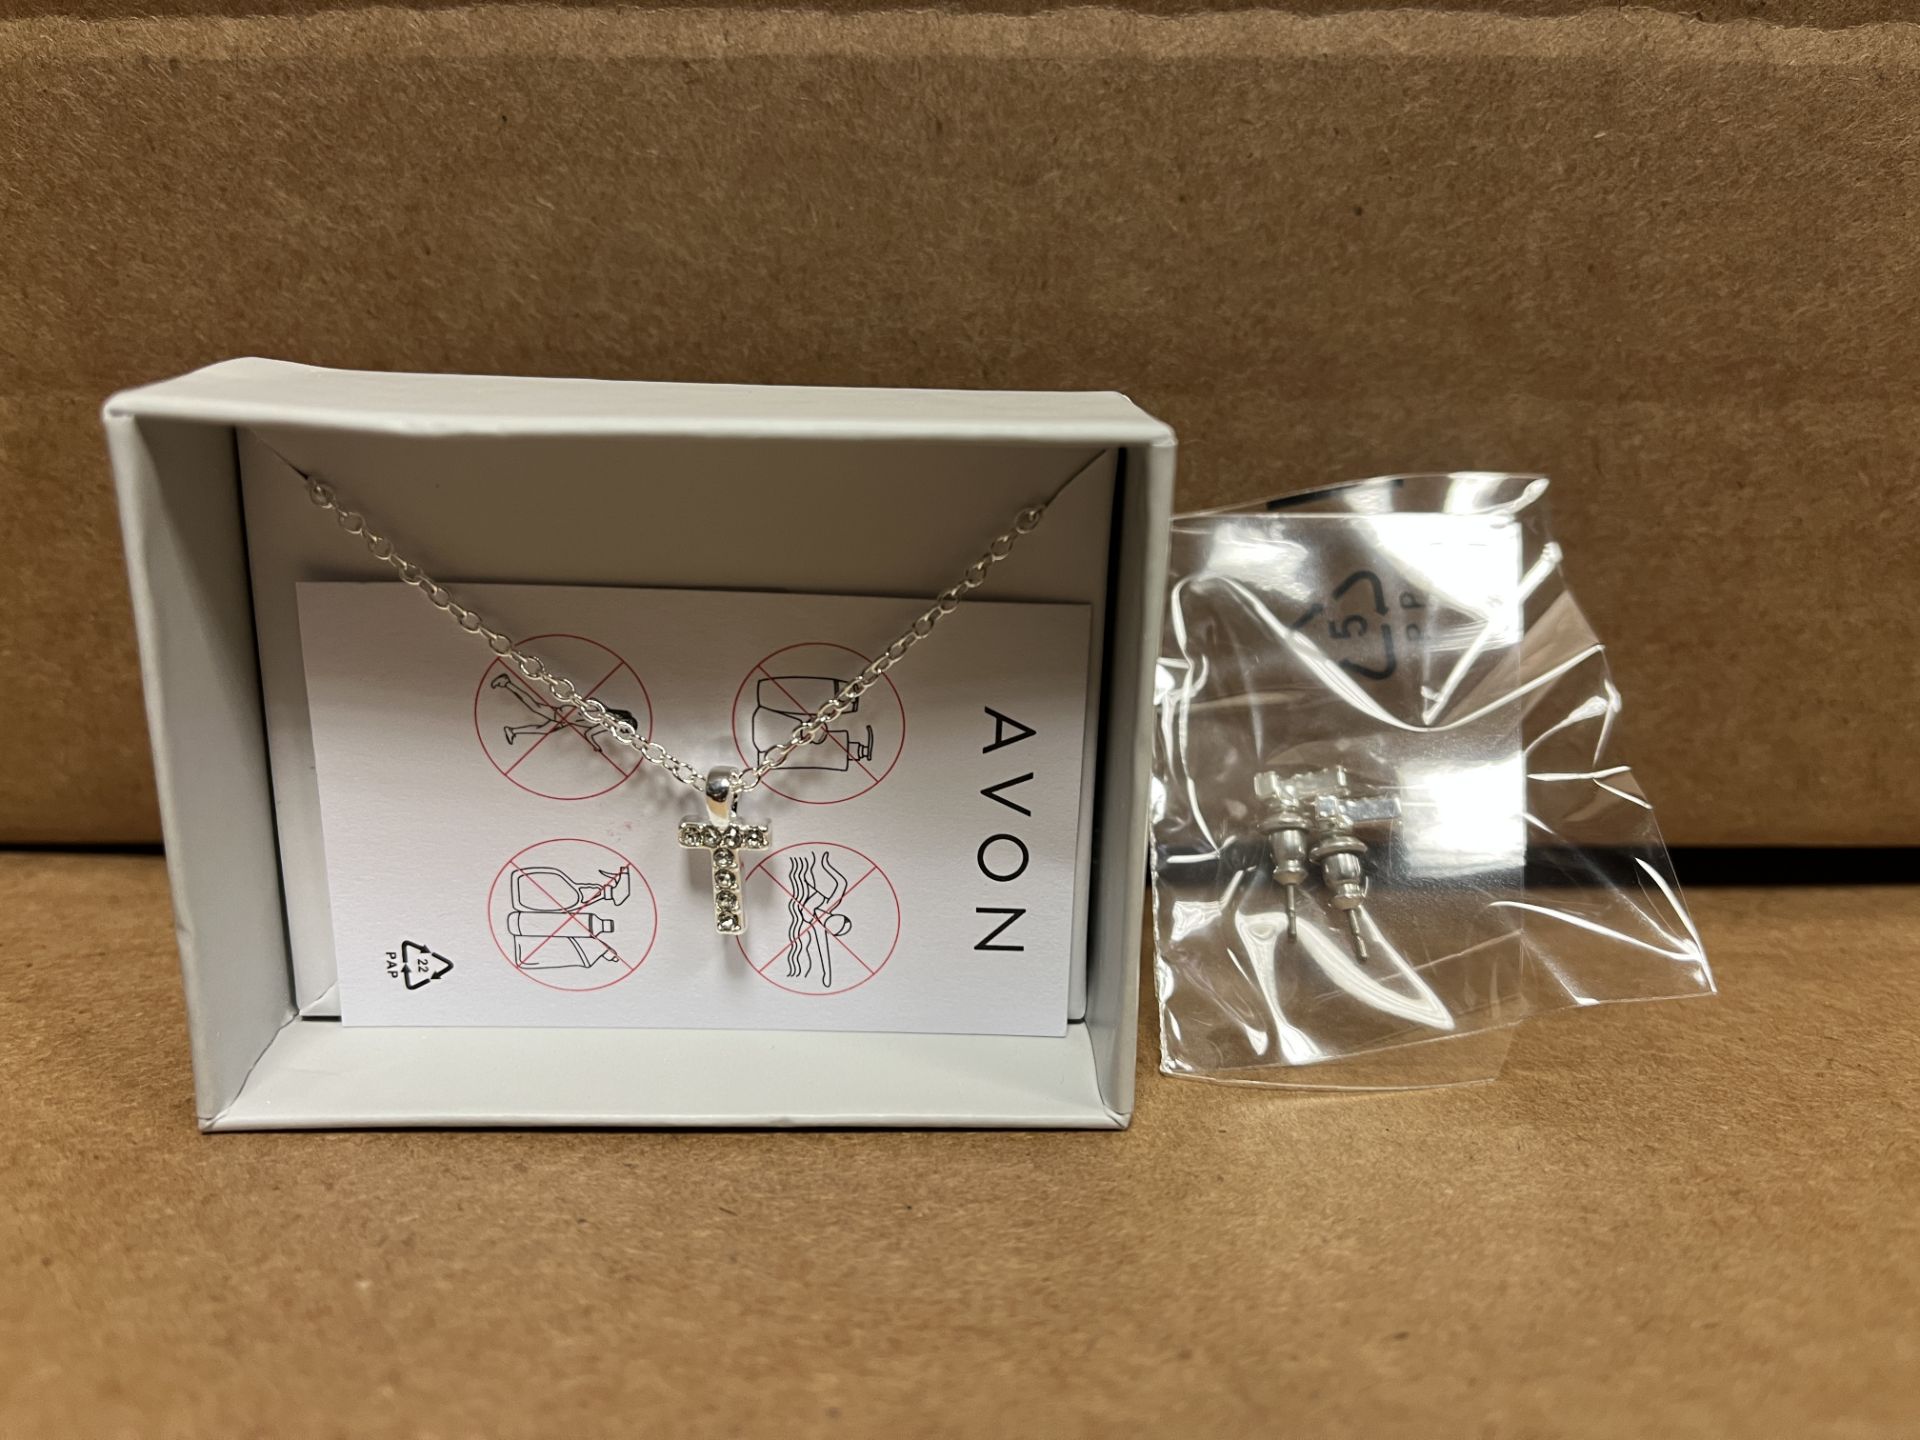 50 X BRAND NEW AVON LEAH EARRING AND NECKLACE GIFTSETS EMBELLISHED WITH CRYSTALS FROM SWAROVSKI